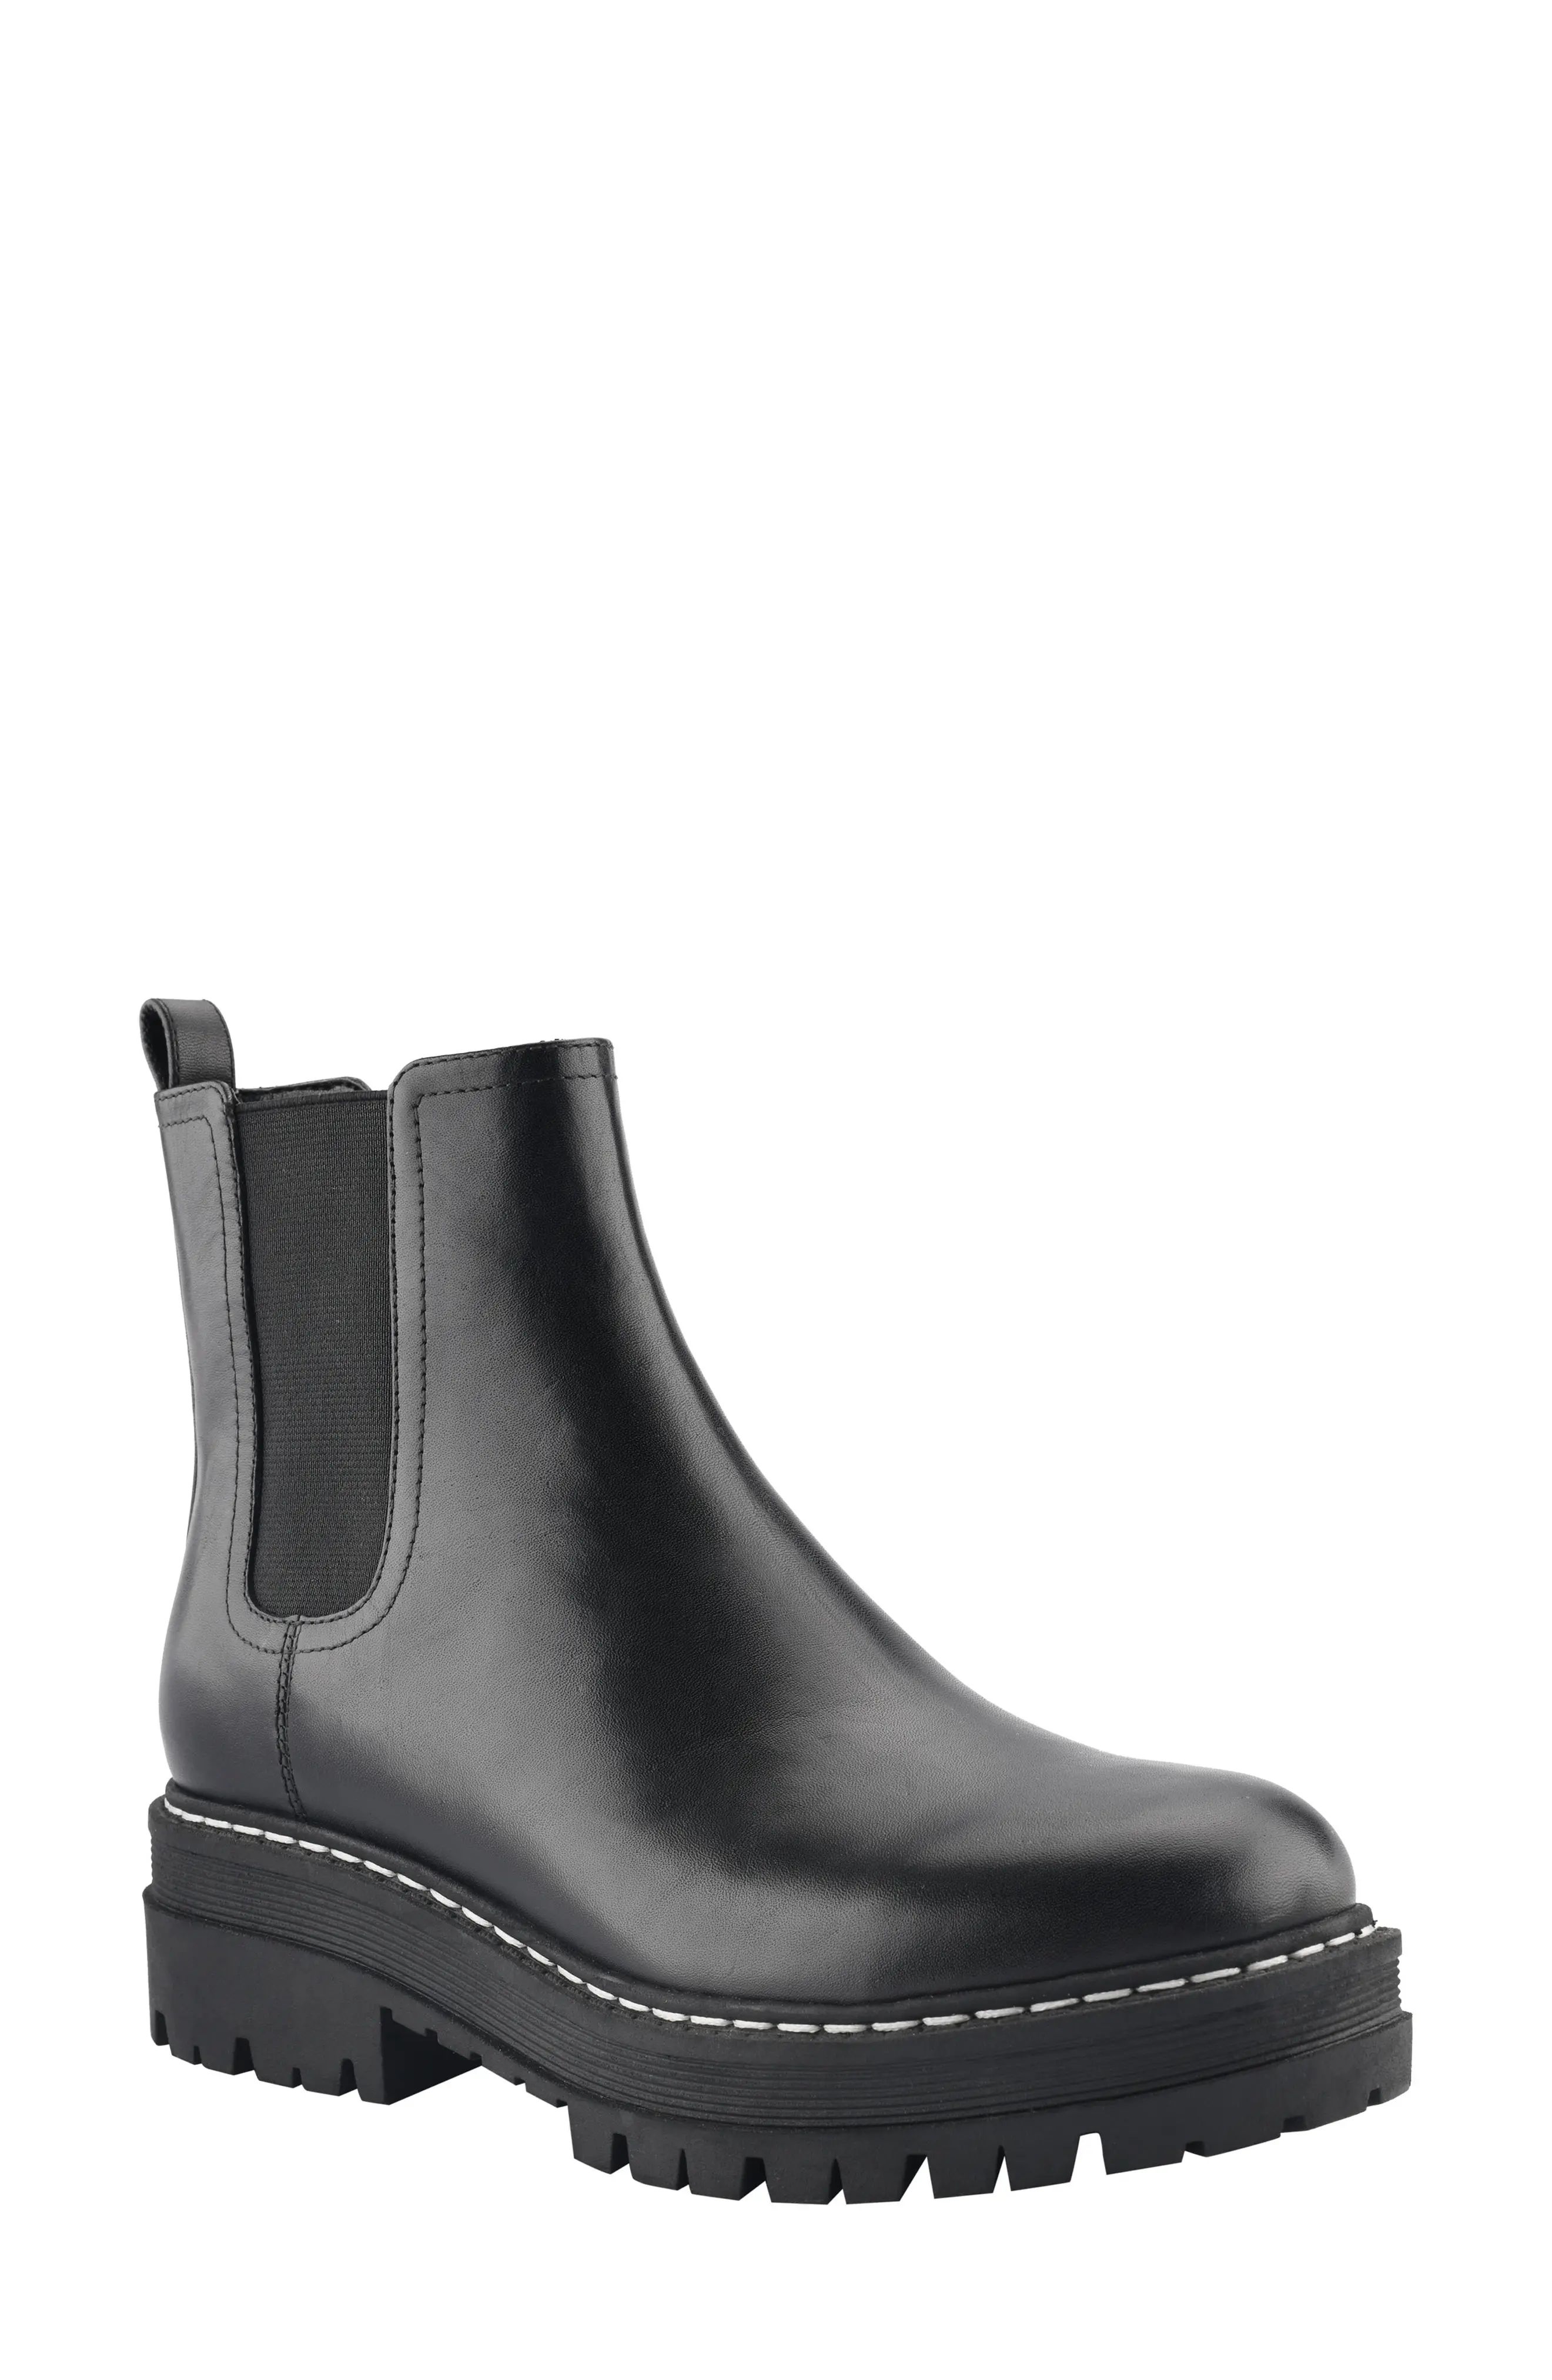 Marc Fisher LTD Padmia Chelsea Boot, Size 5 in Black/Black Leather at Nordstrom | Nordstrom